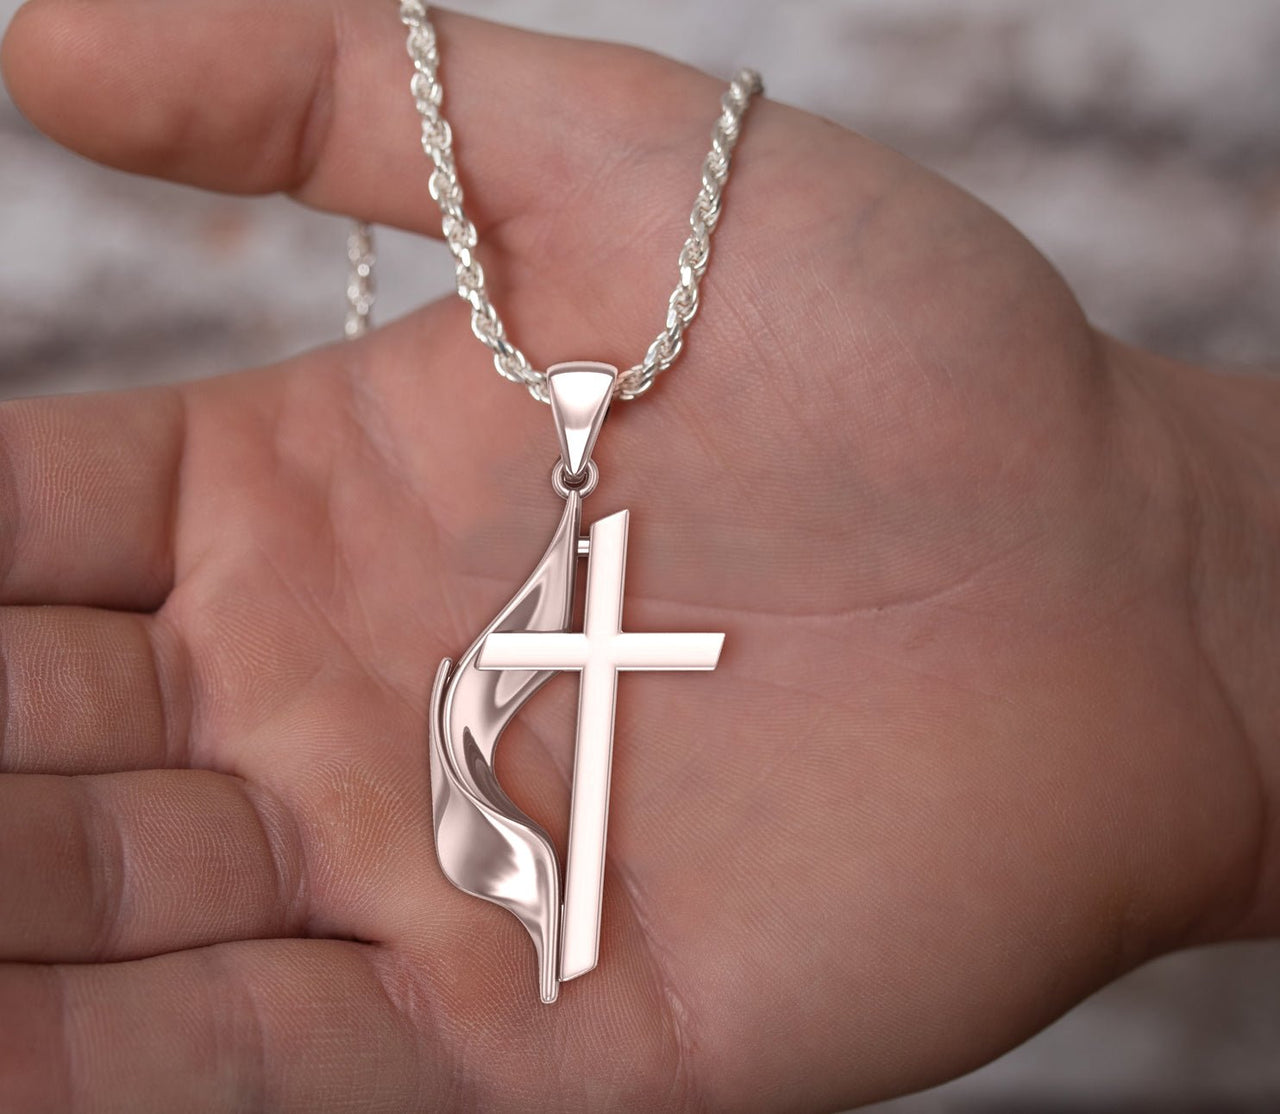 US Jewels Men's 925 Sterling Silver Large Methodist Cross Flame Pendant Necklace, 43mm - US Jewels